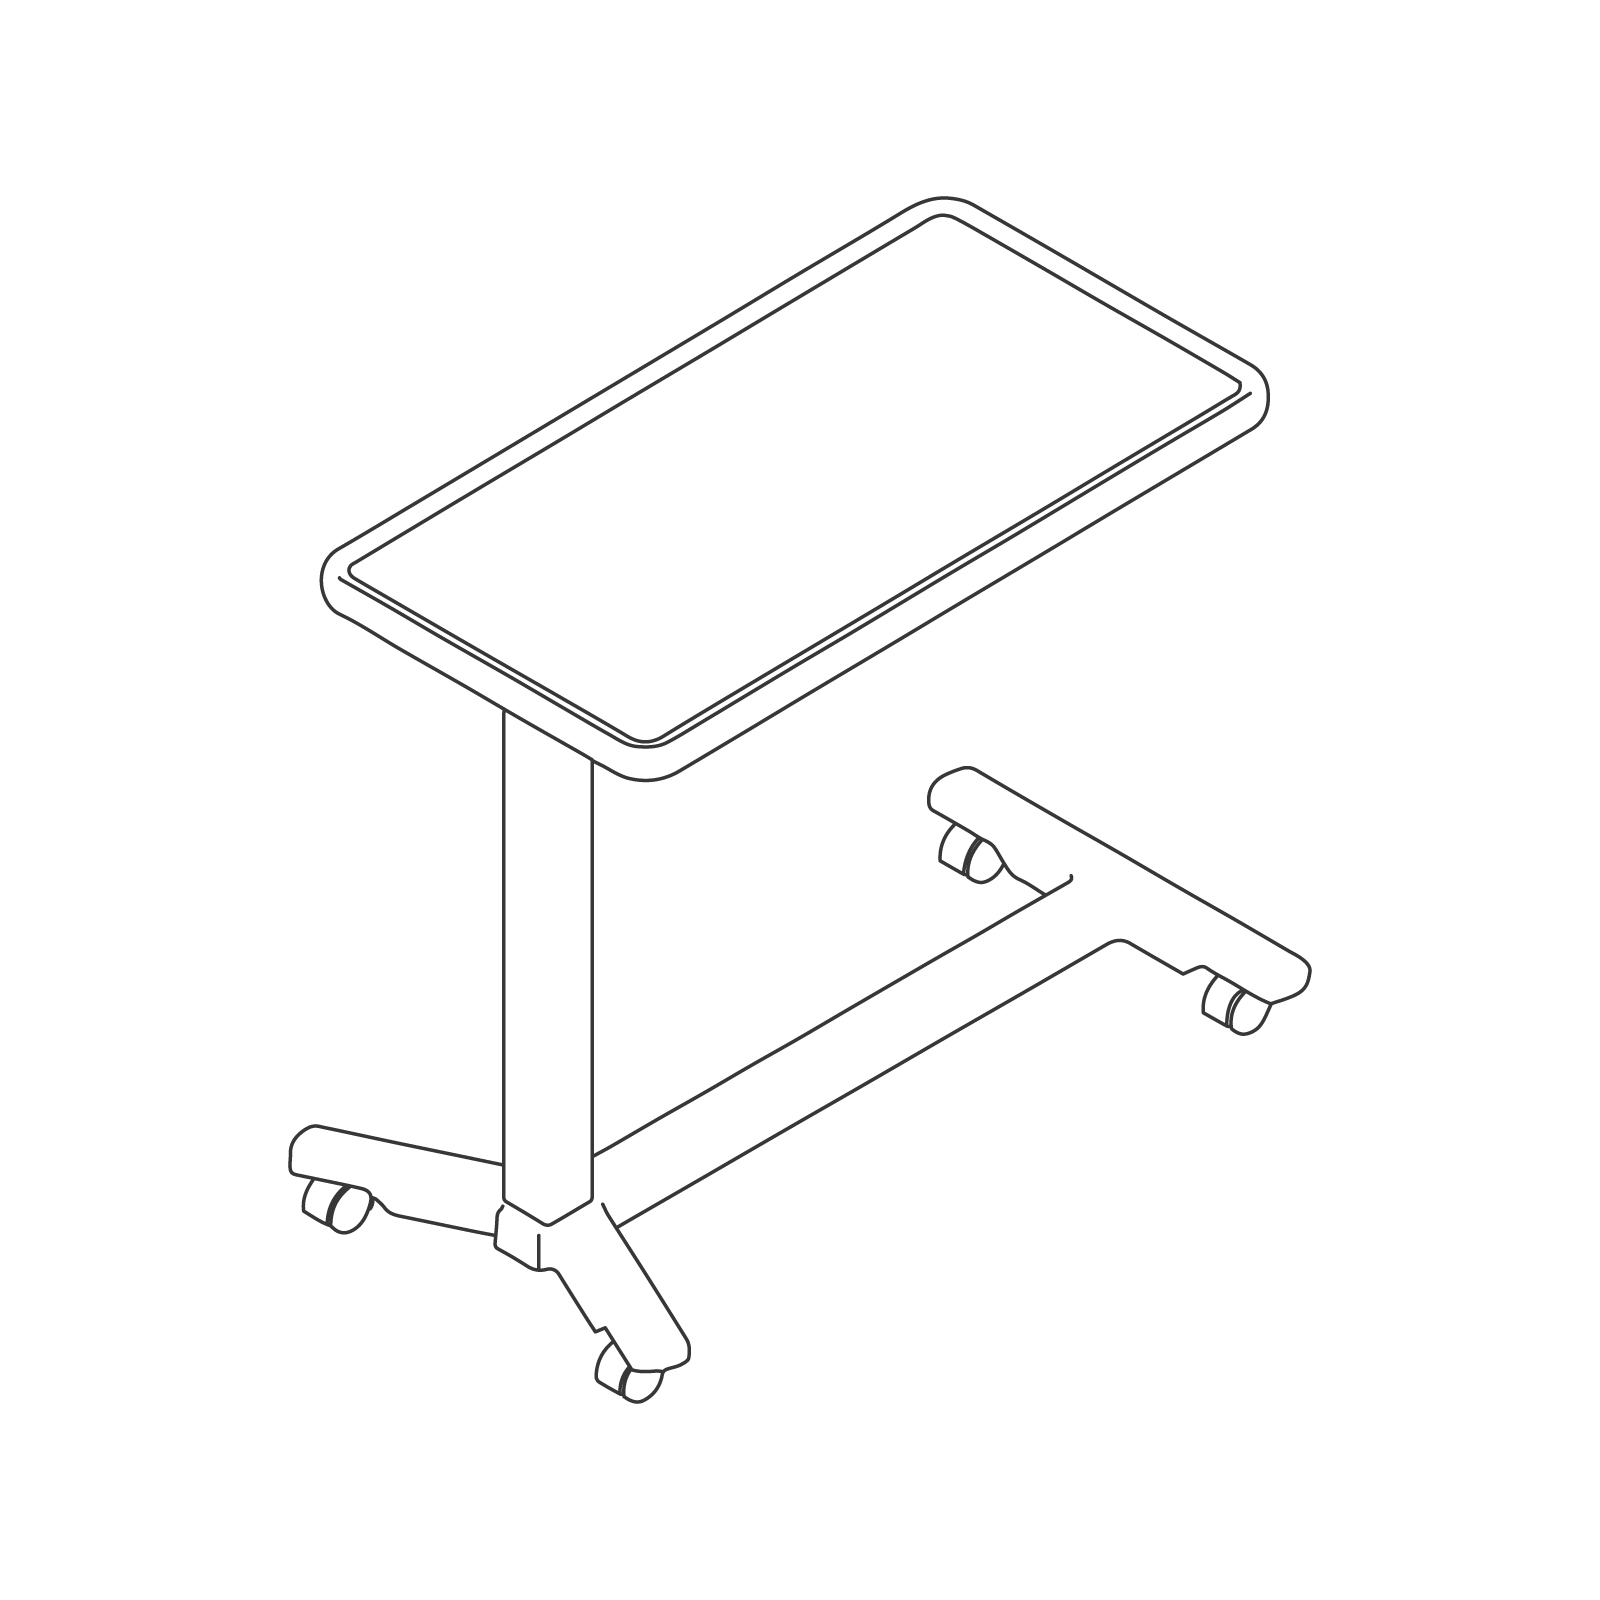 A line drawing - EZ-123 Overbed Table